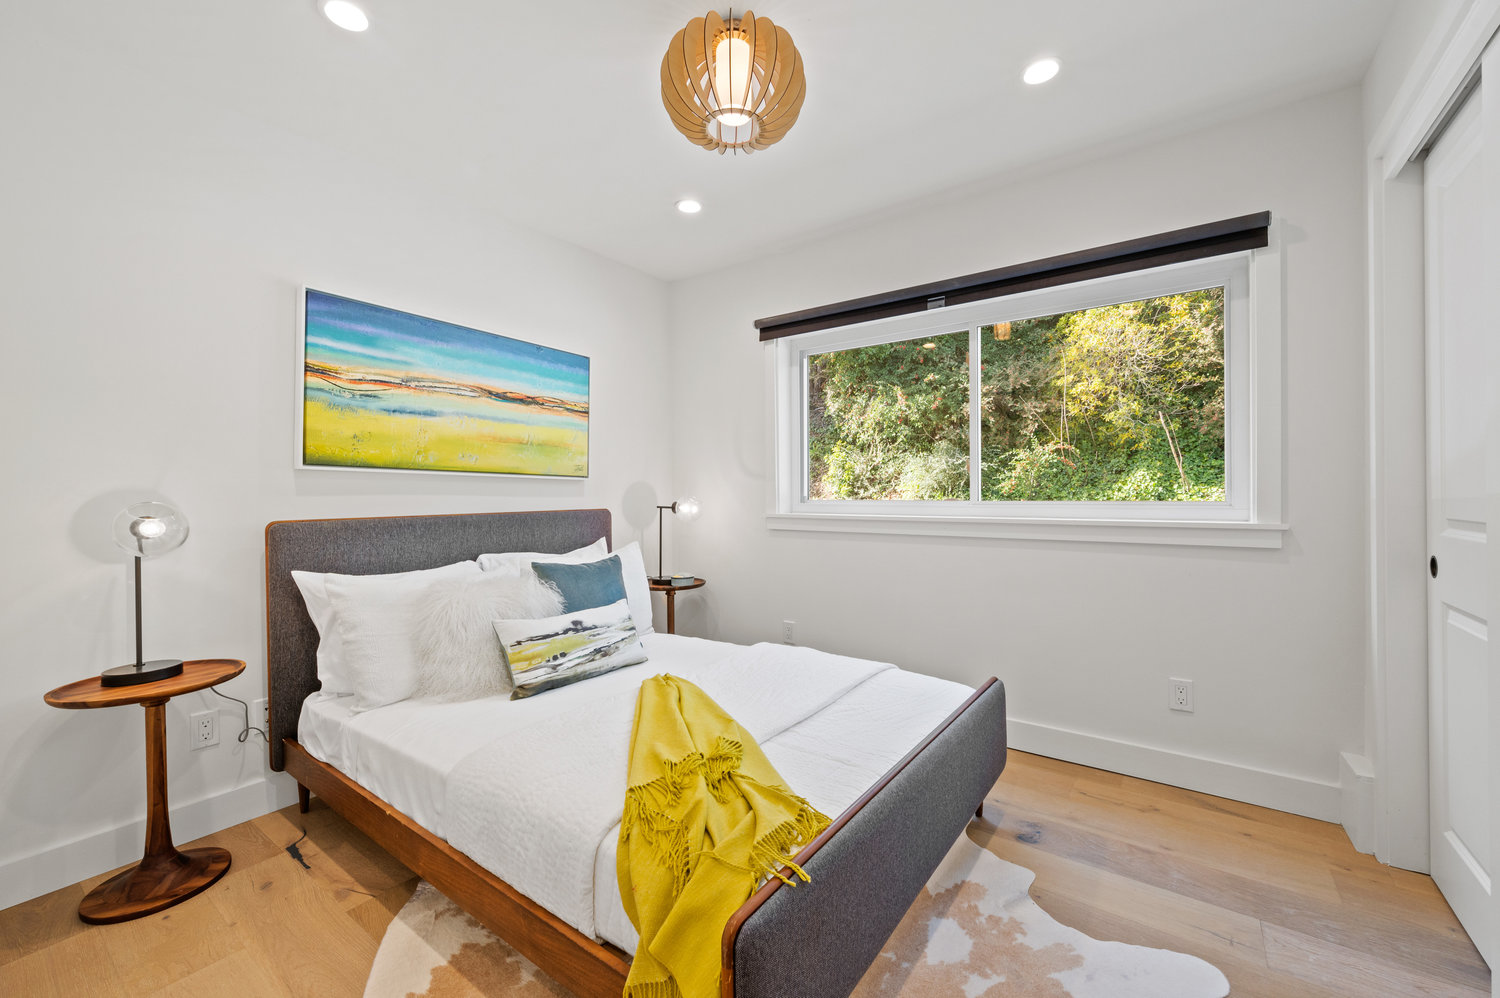 Property Photo: Bedroom three, featuring a large window, mid-century light fixture, and wood floors